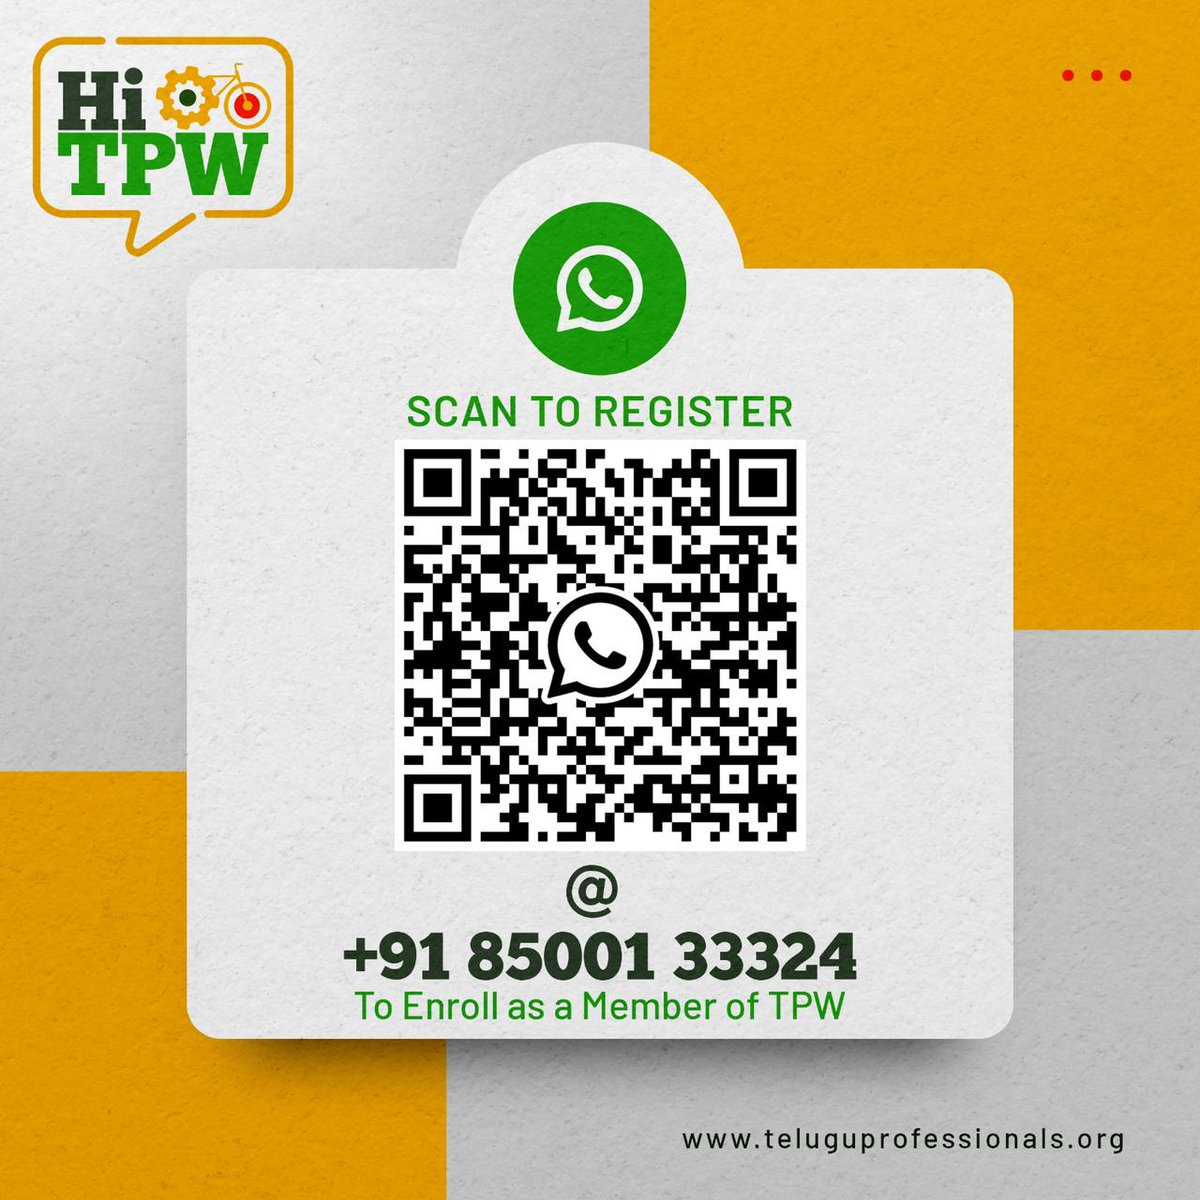 ✌🏼*Hi TPW*✌🏼

*Scan the QR code to be a member of TPW*

Do you want to become a member of *Telugu Professional Wing*. Just say “*Hi TPW*” @ 8500133324 or scan the QR code. 

Join the vibrant team to work for TDP 👍🏼

~ Team TPW

#TeluguProfessionals #YoungProfessionals